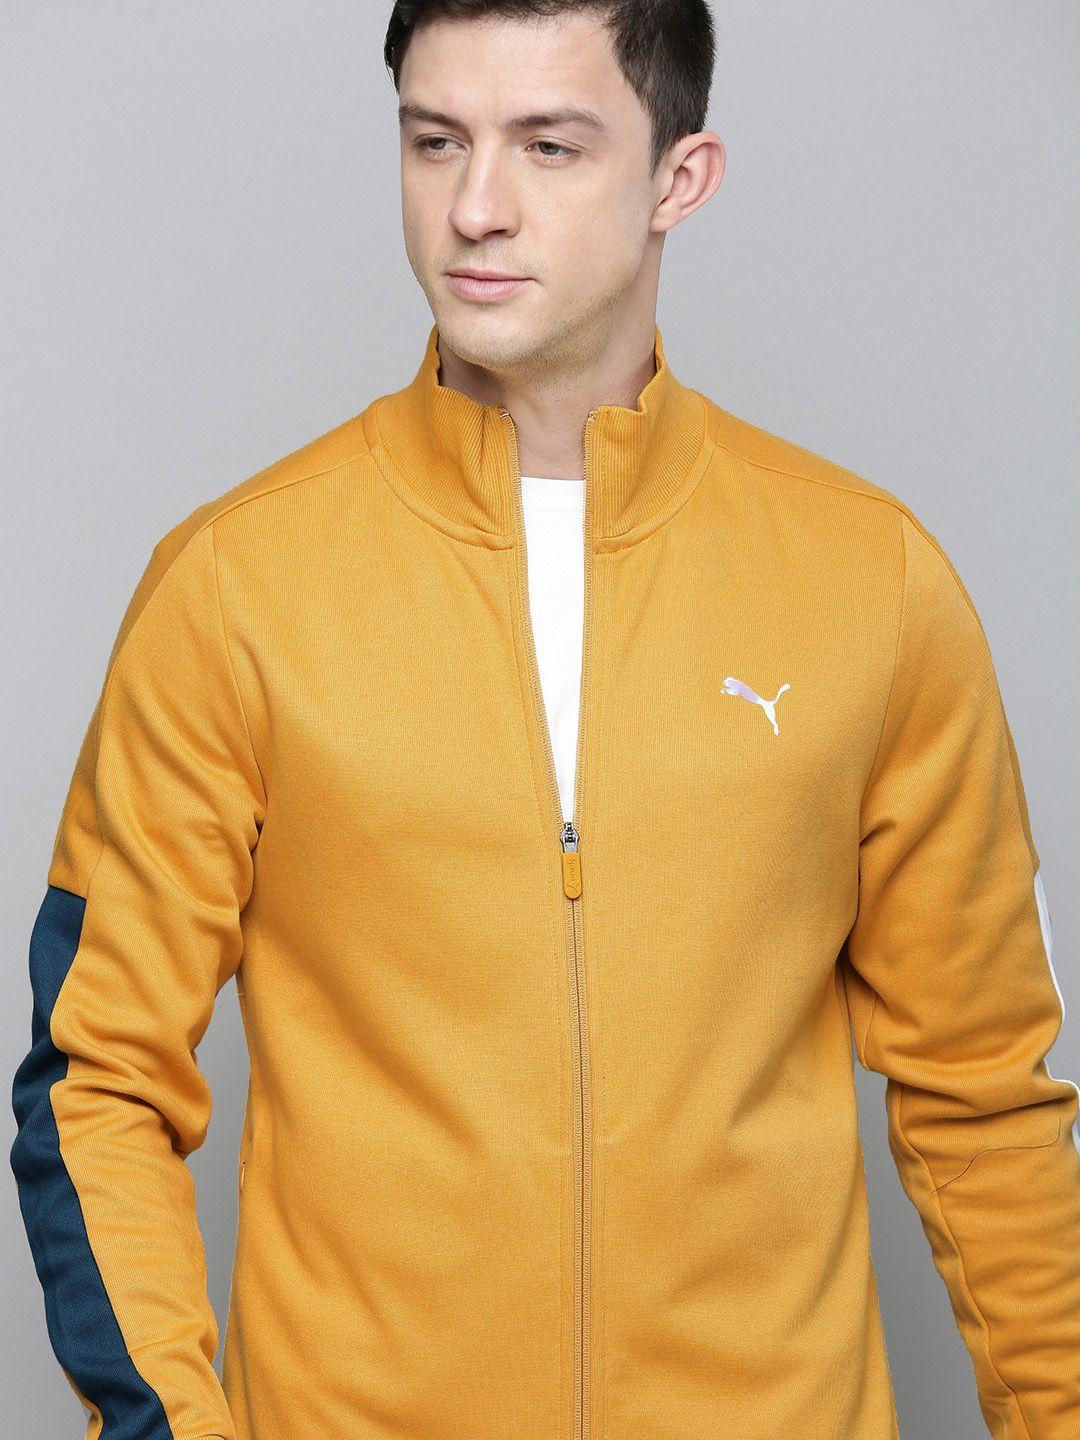 one8 x puma men mustard yellow solid track jacket with contrast details